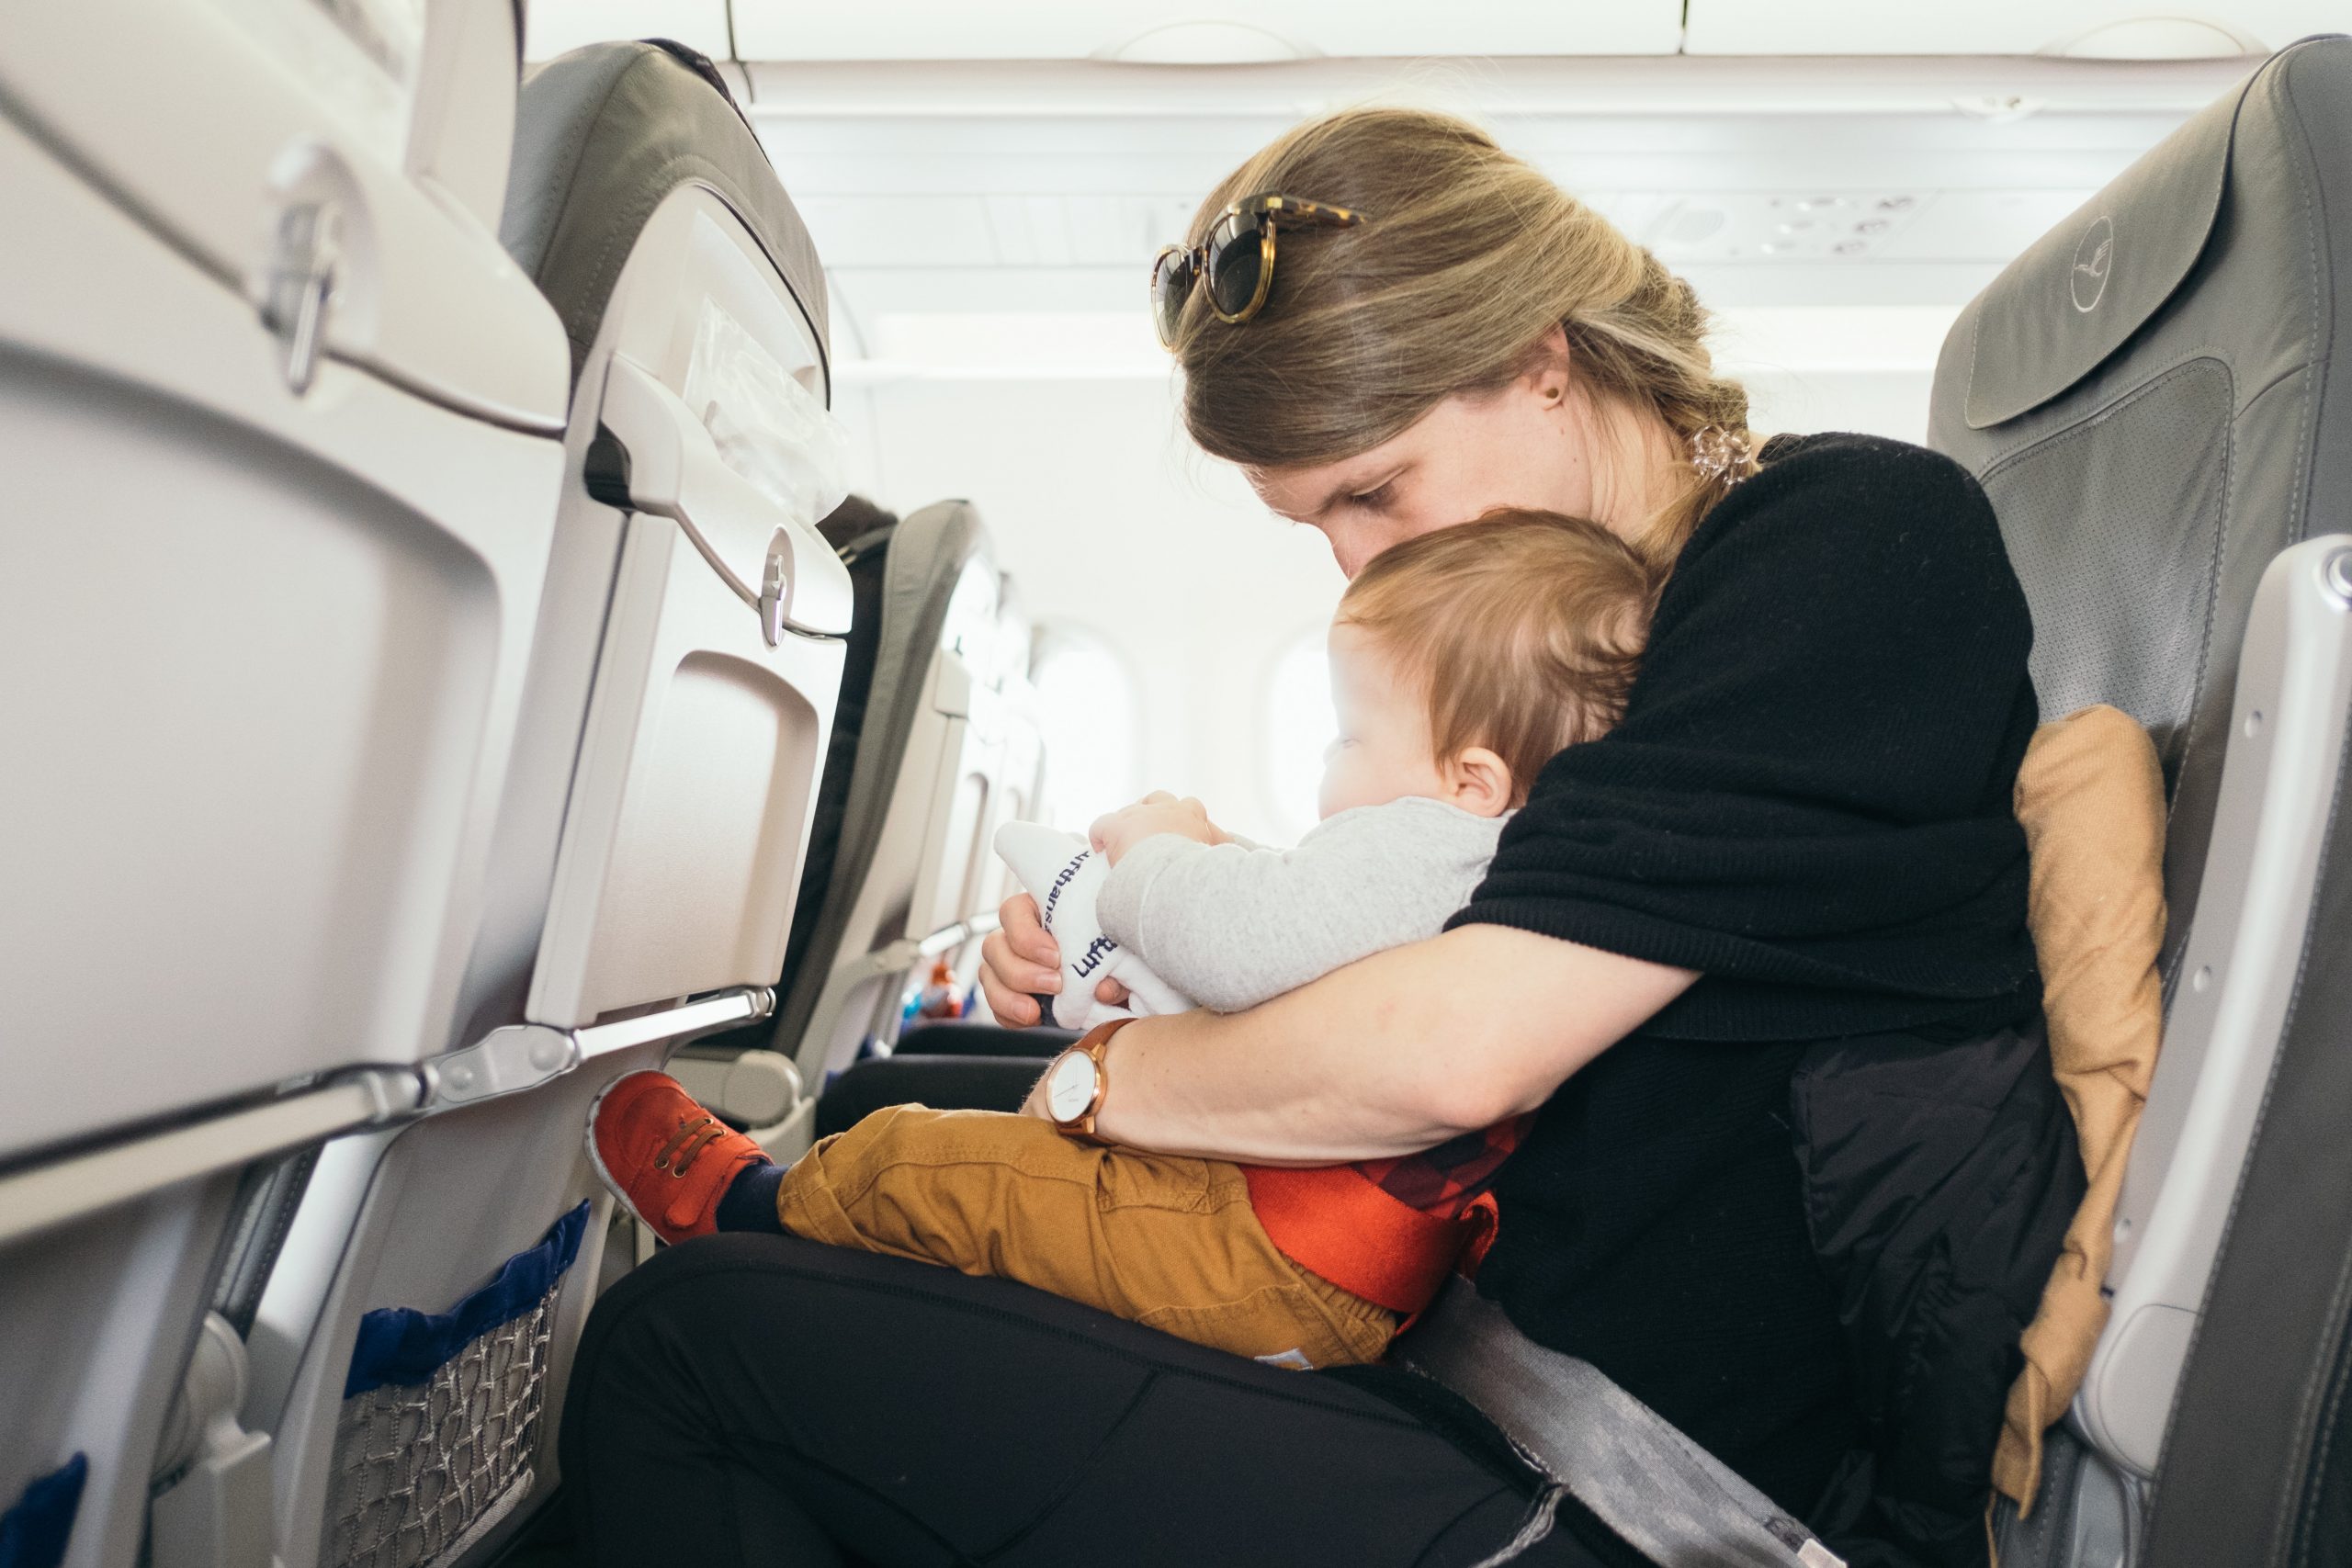 Keeping the baby entertained during the flight